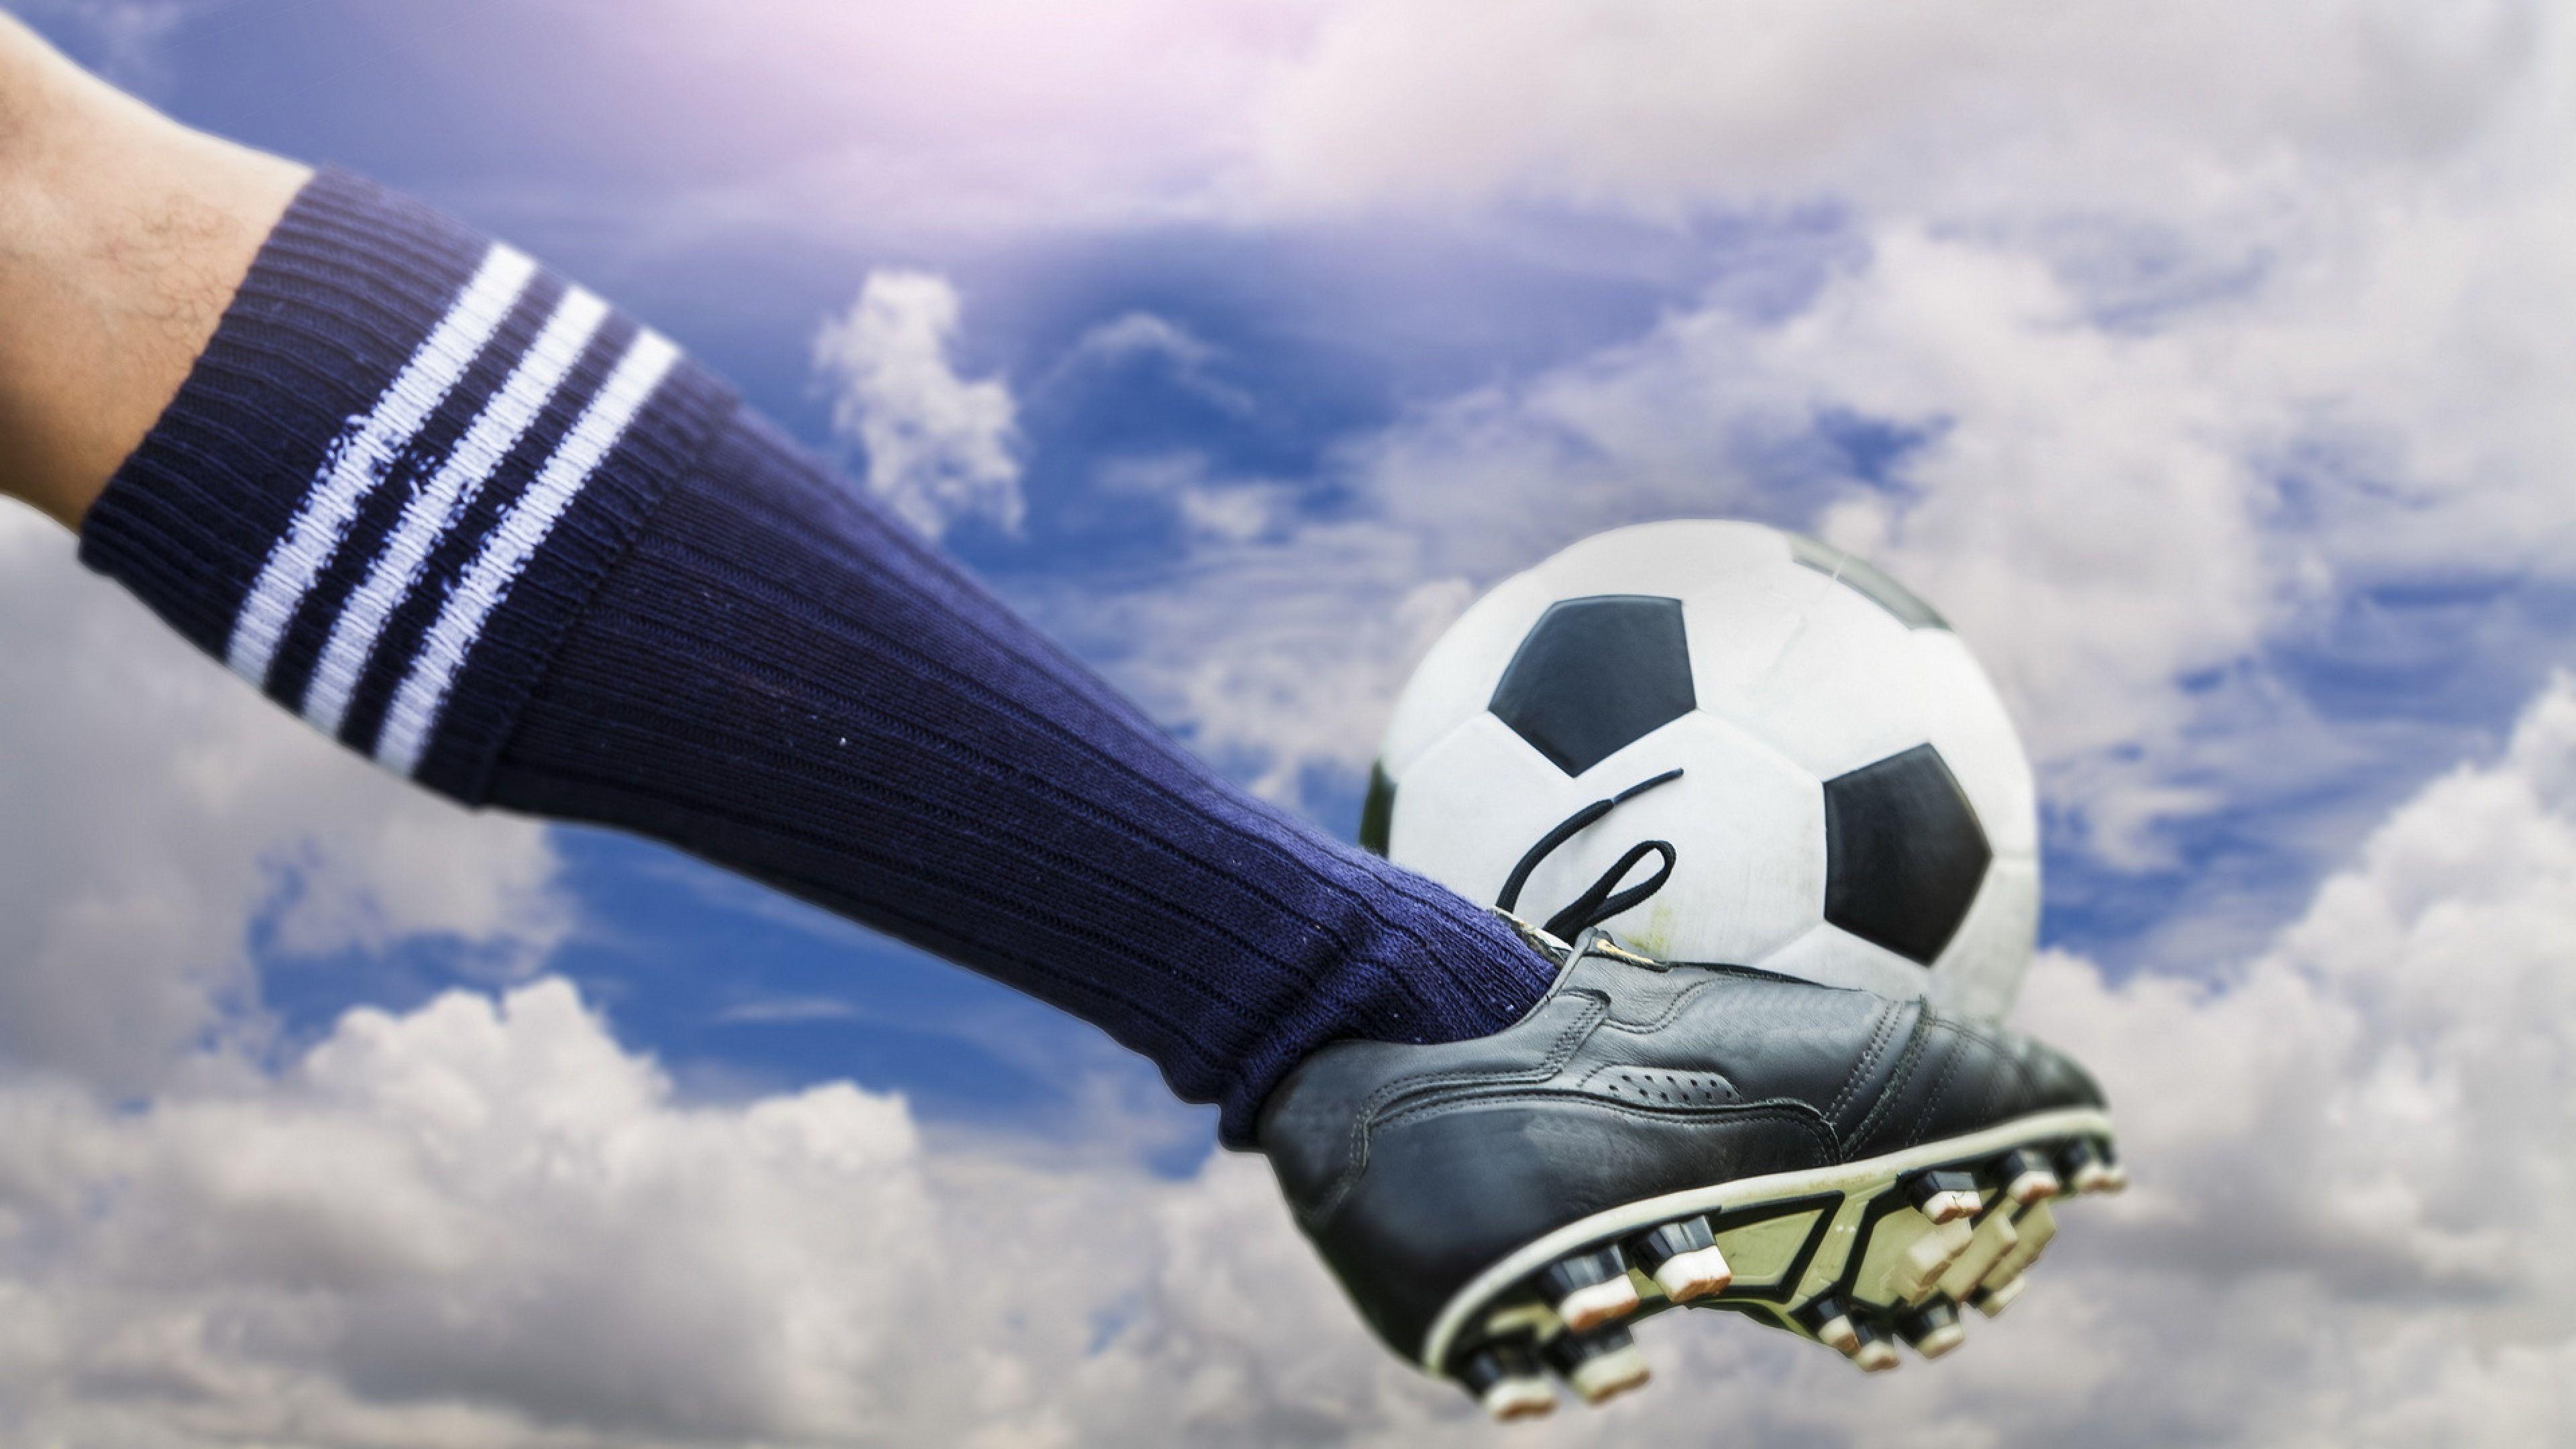 Football Boots Stockings, HD Sports, 4k Wallpapers, Image